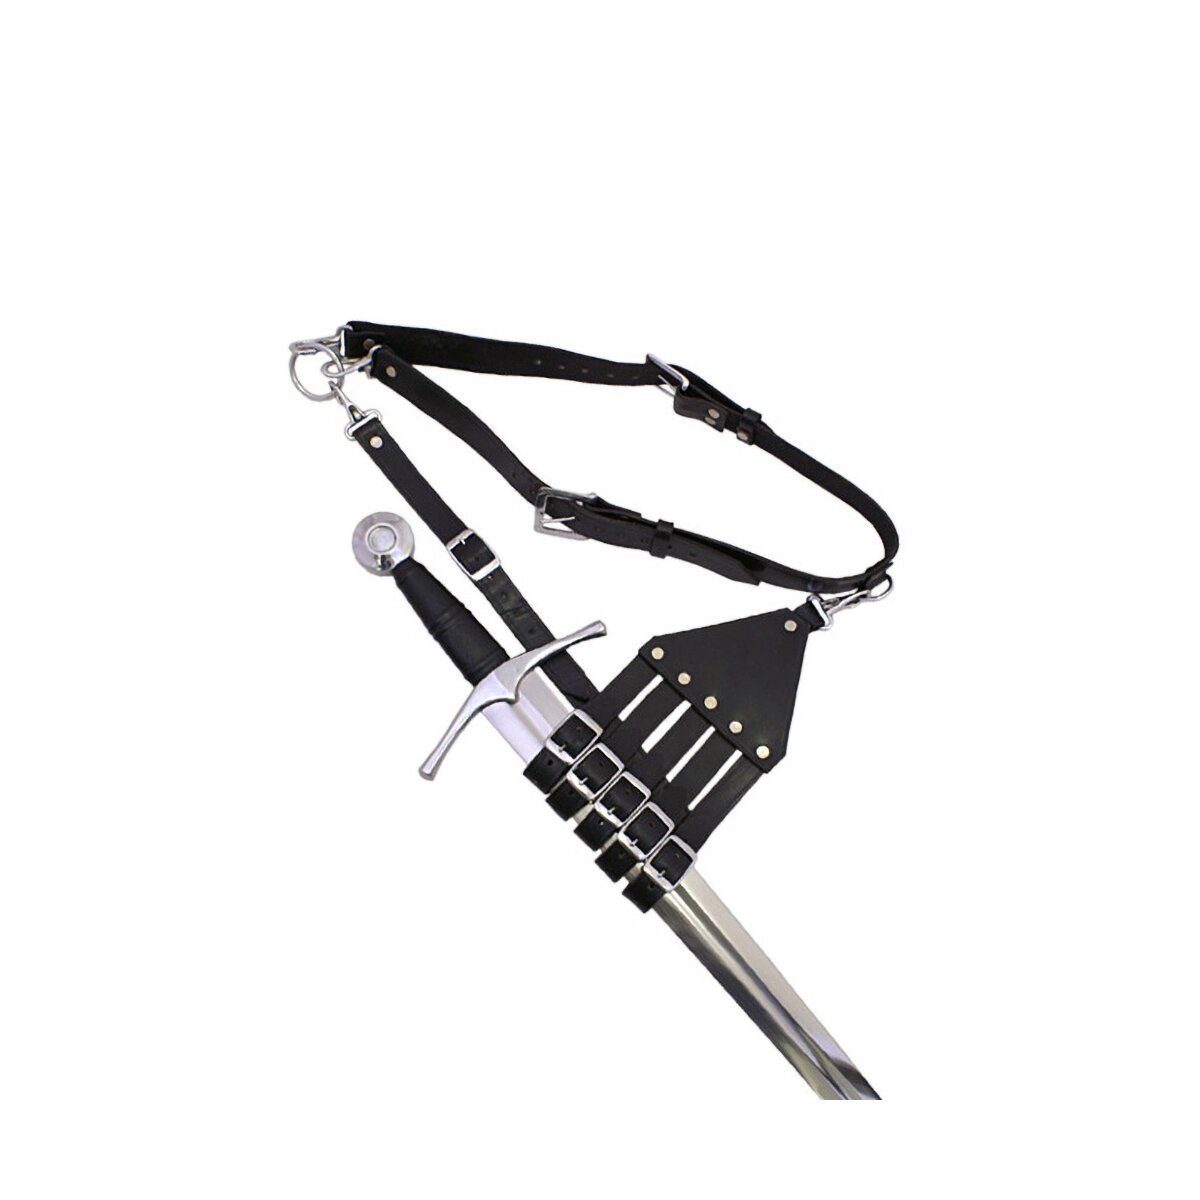 Belt with holder for rapiers, sabers and swords